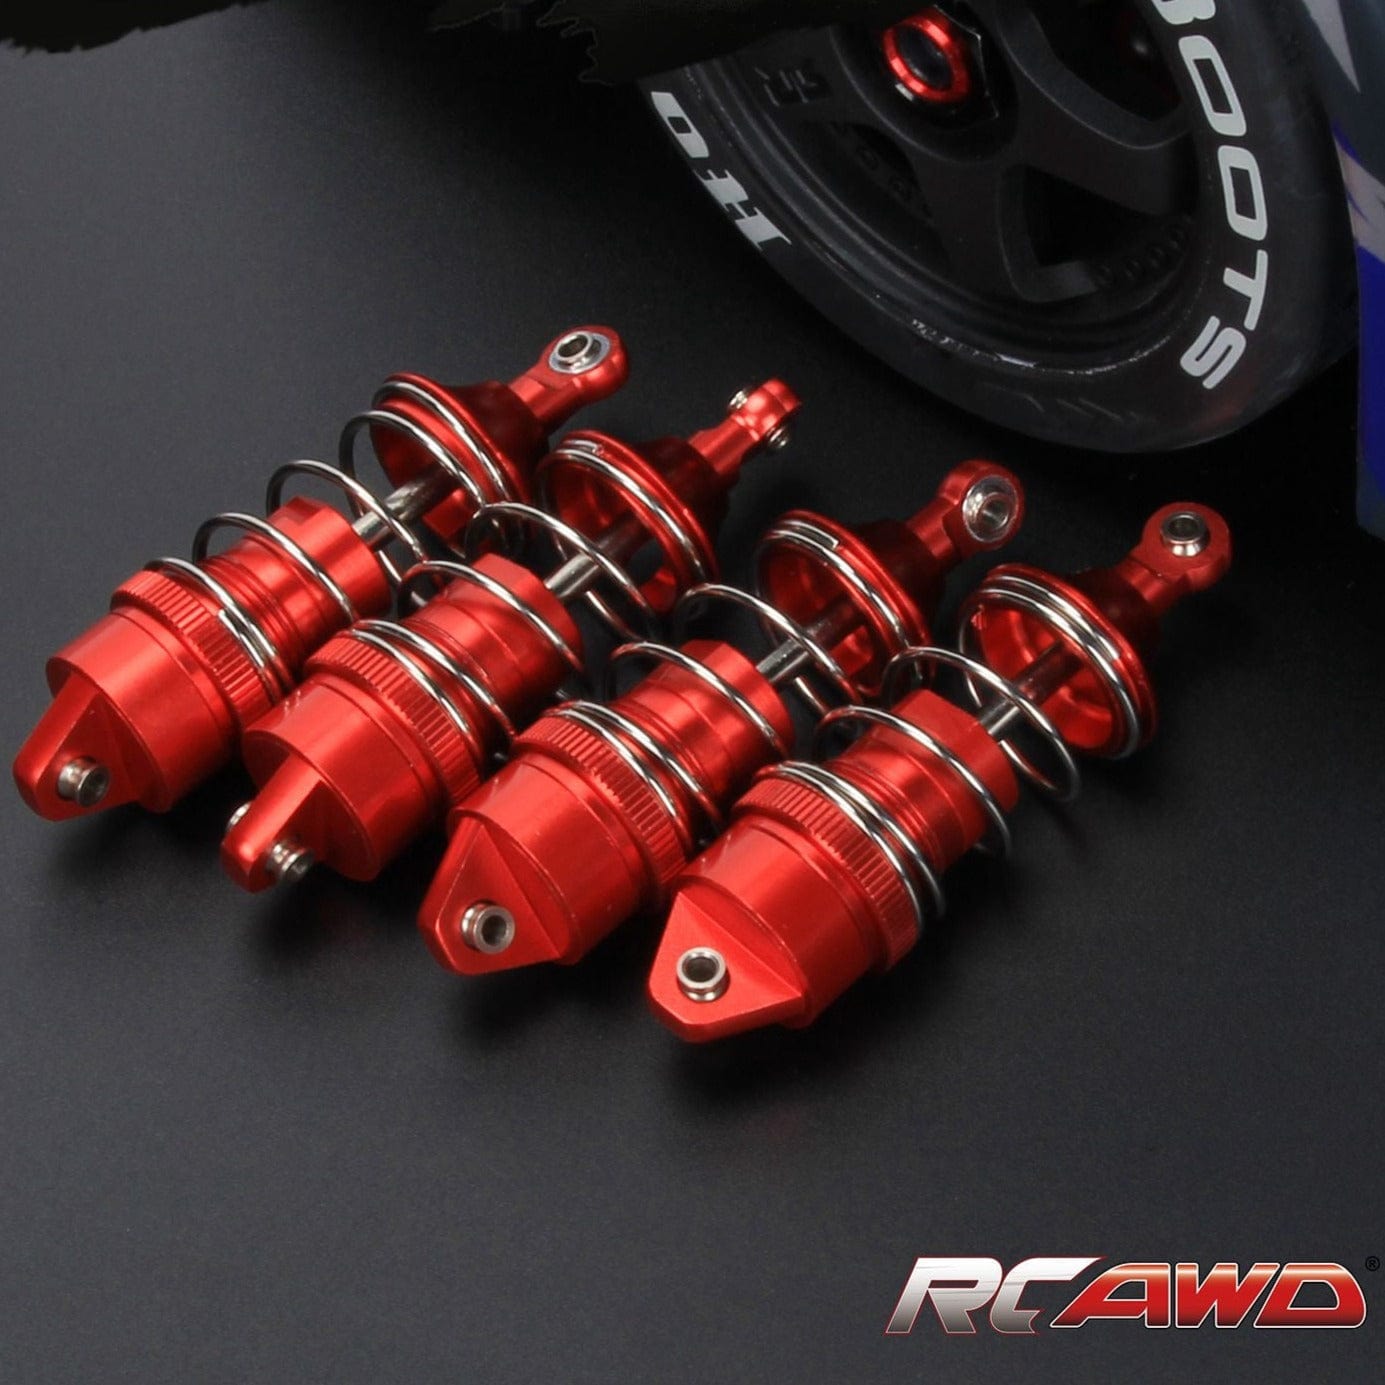 RCAWD ARRMA 3S Red RCAWD ARRMA Infraction Vendetta 3S upgrades Full Metal Shocks ARA330701